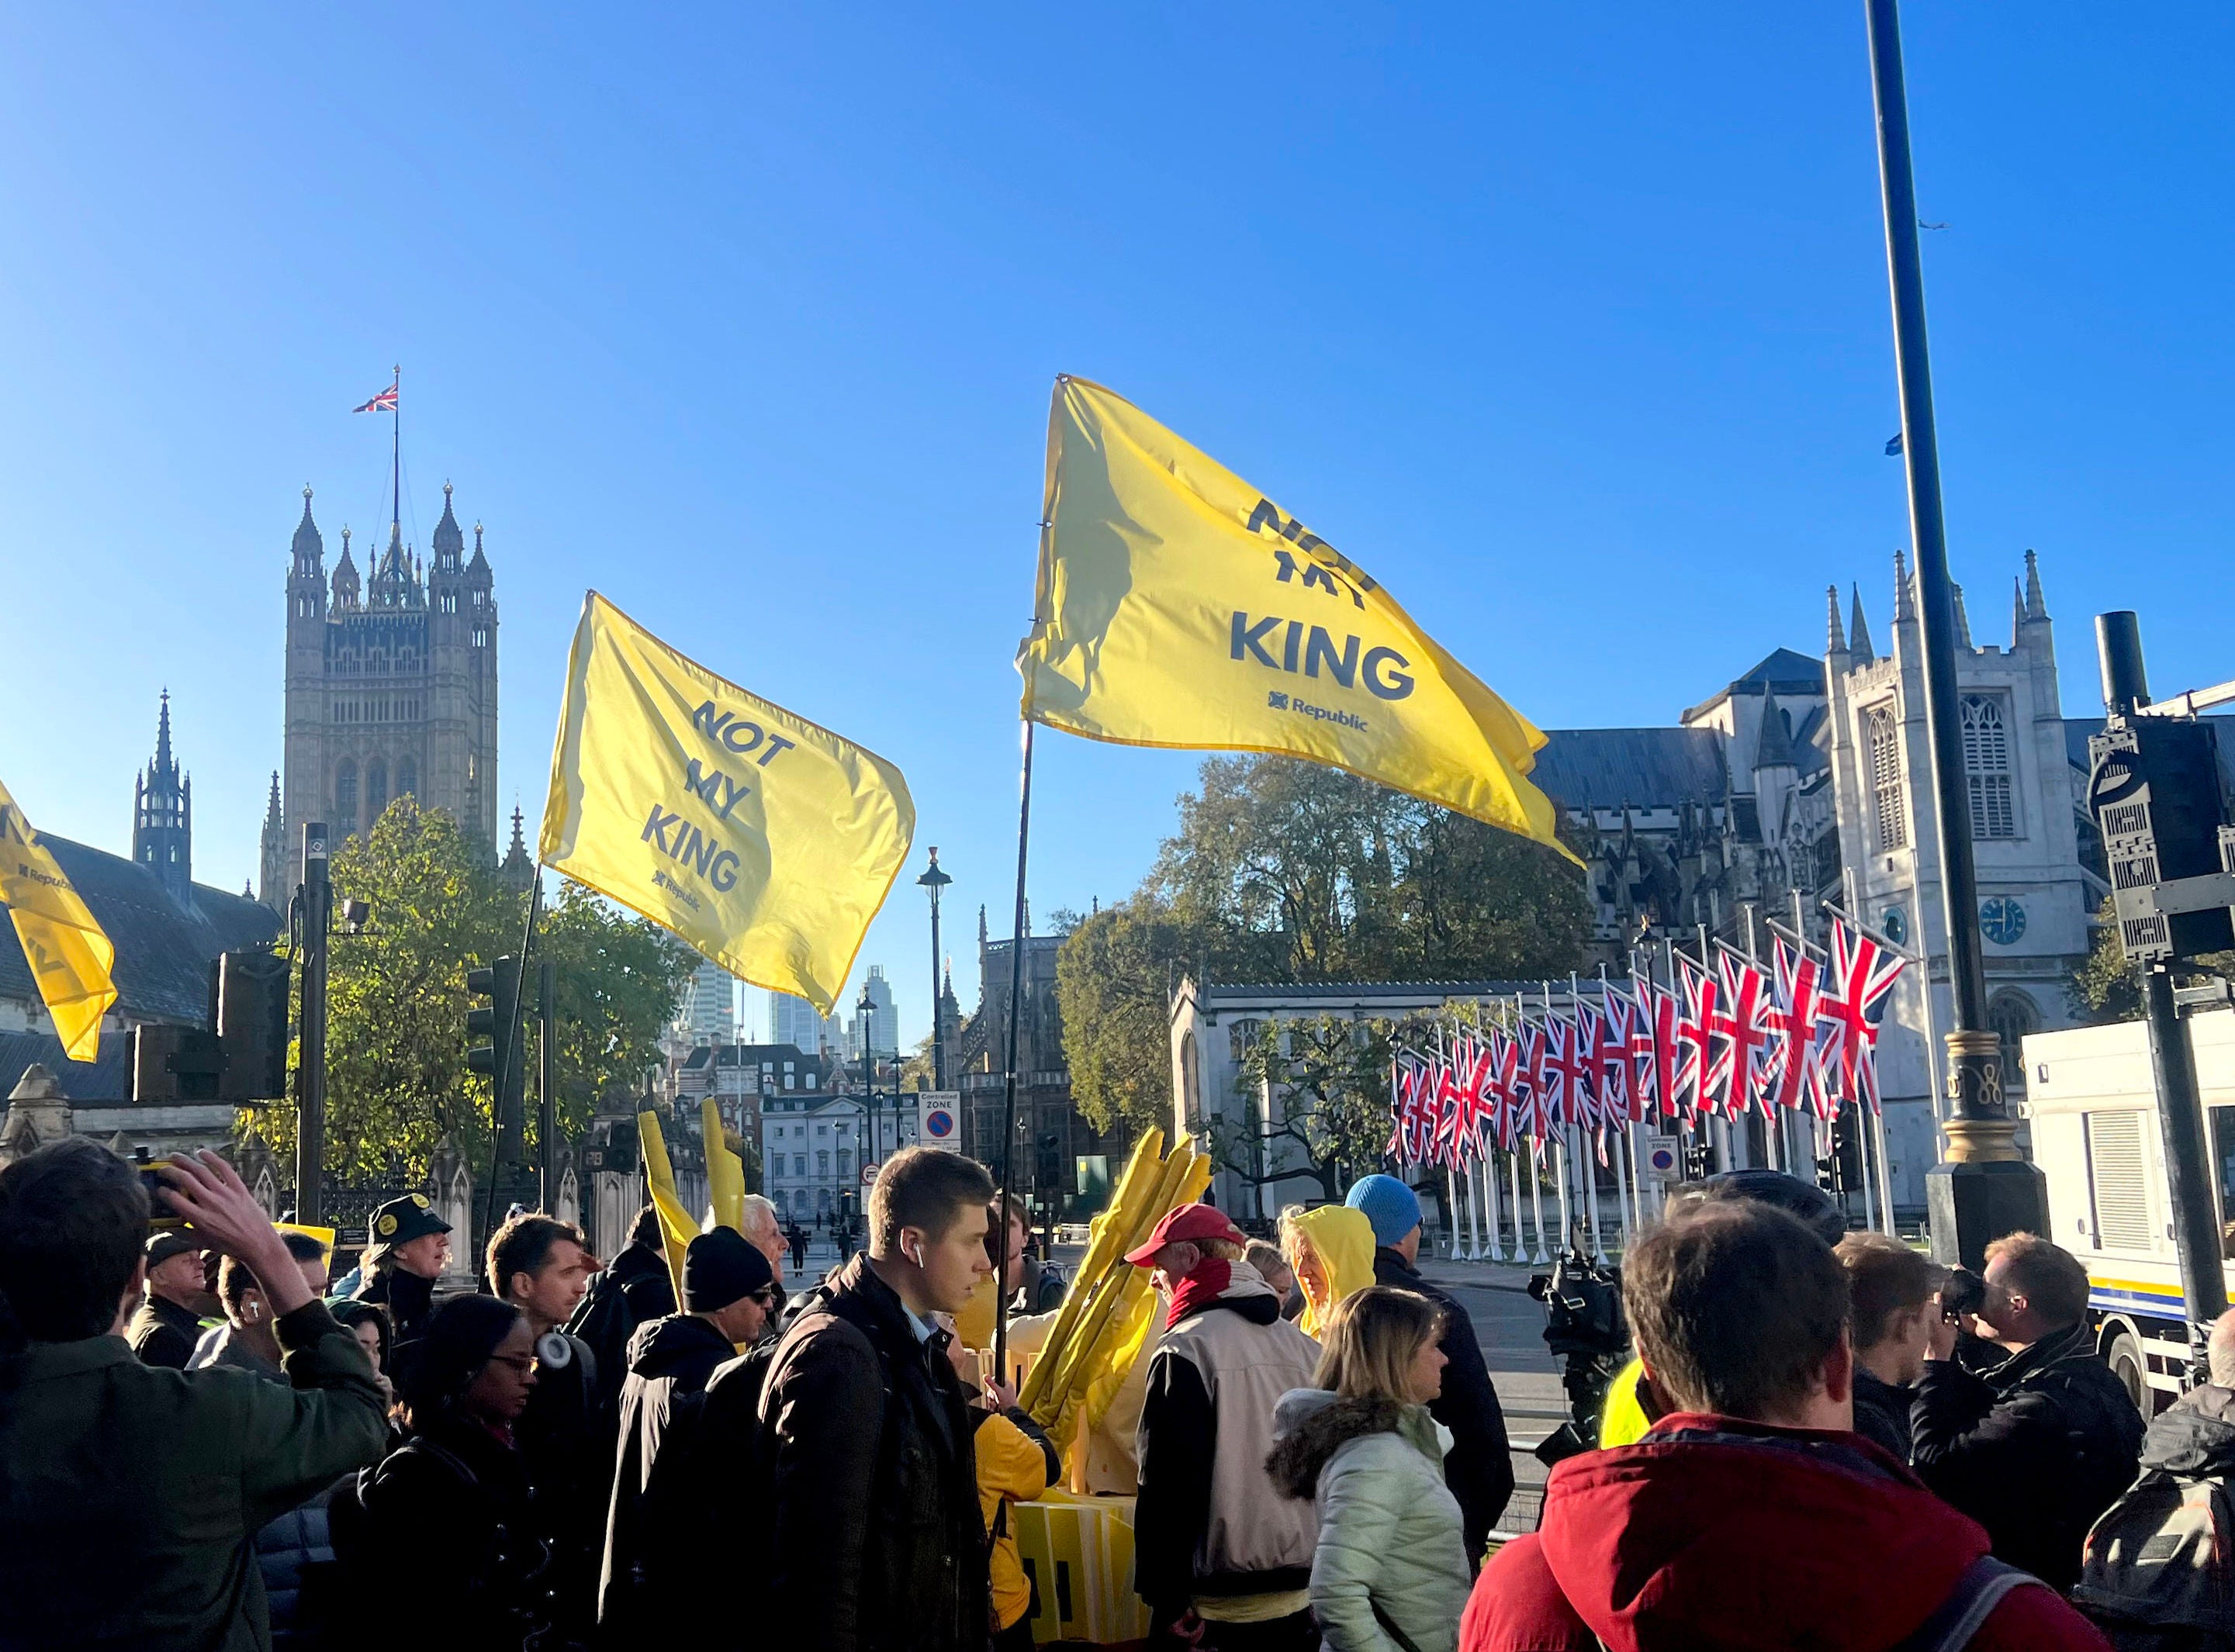 <p>Anti-Monarchy pressure group Republic fly "Not My King" flags in protest outside the Palace of Westminster</p>